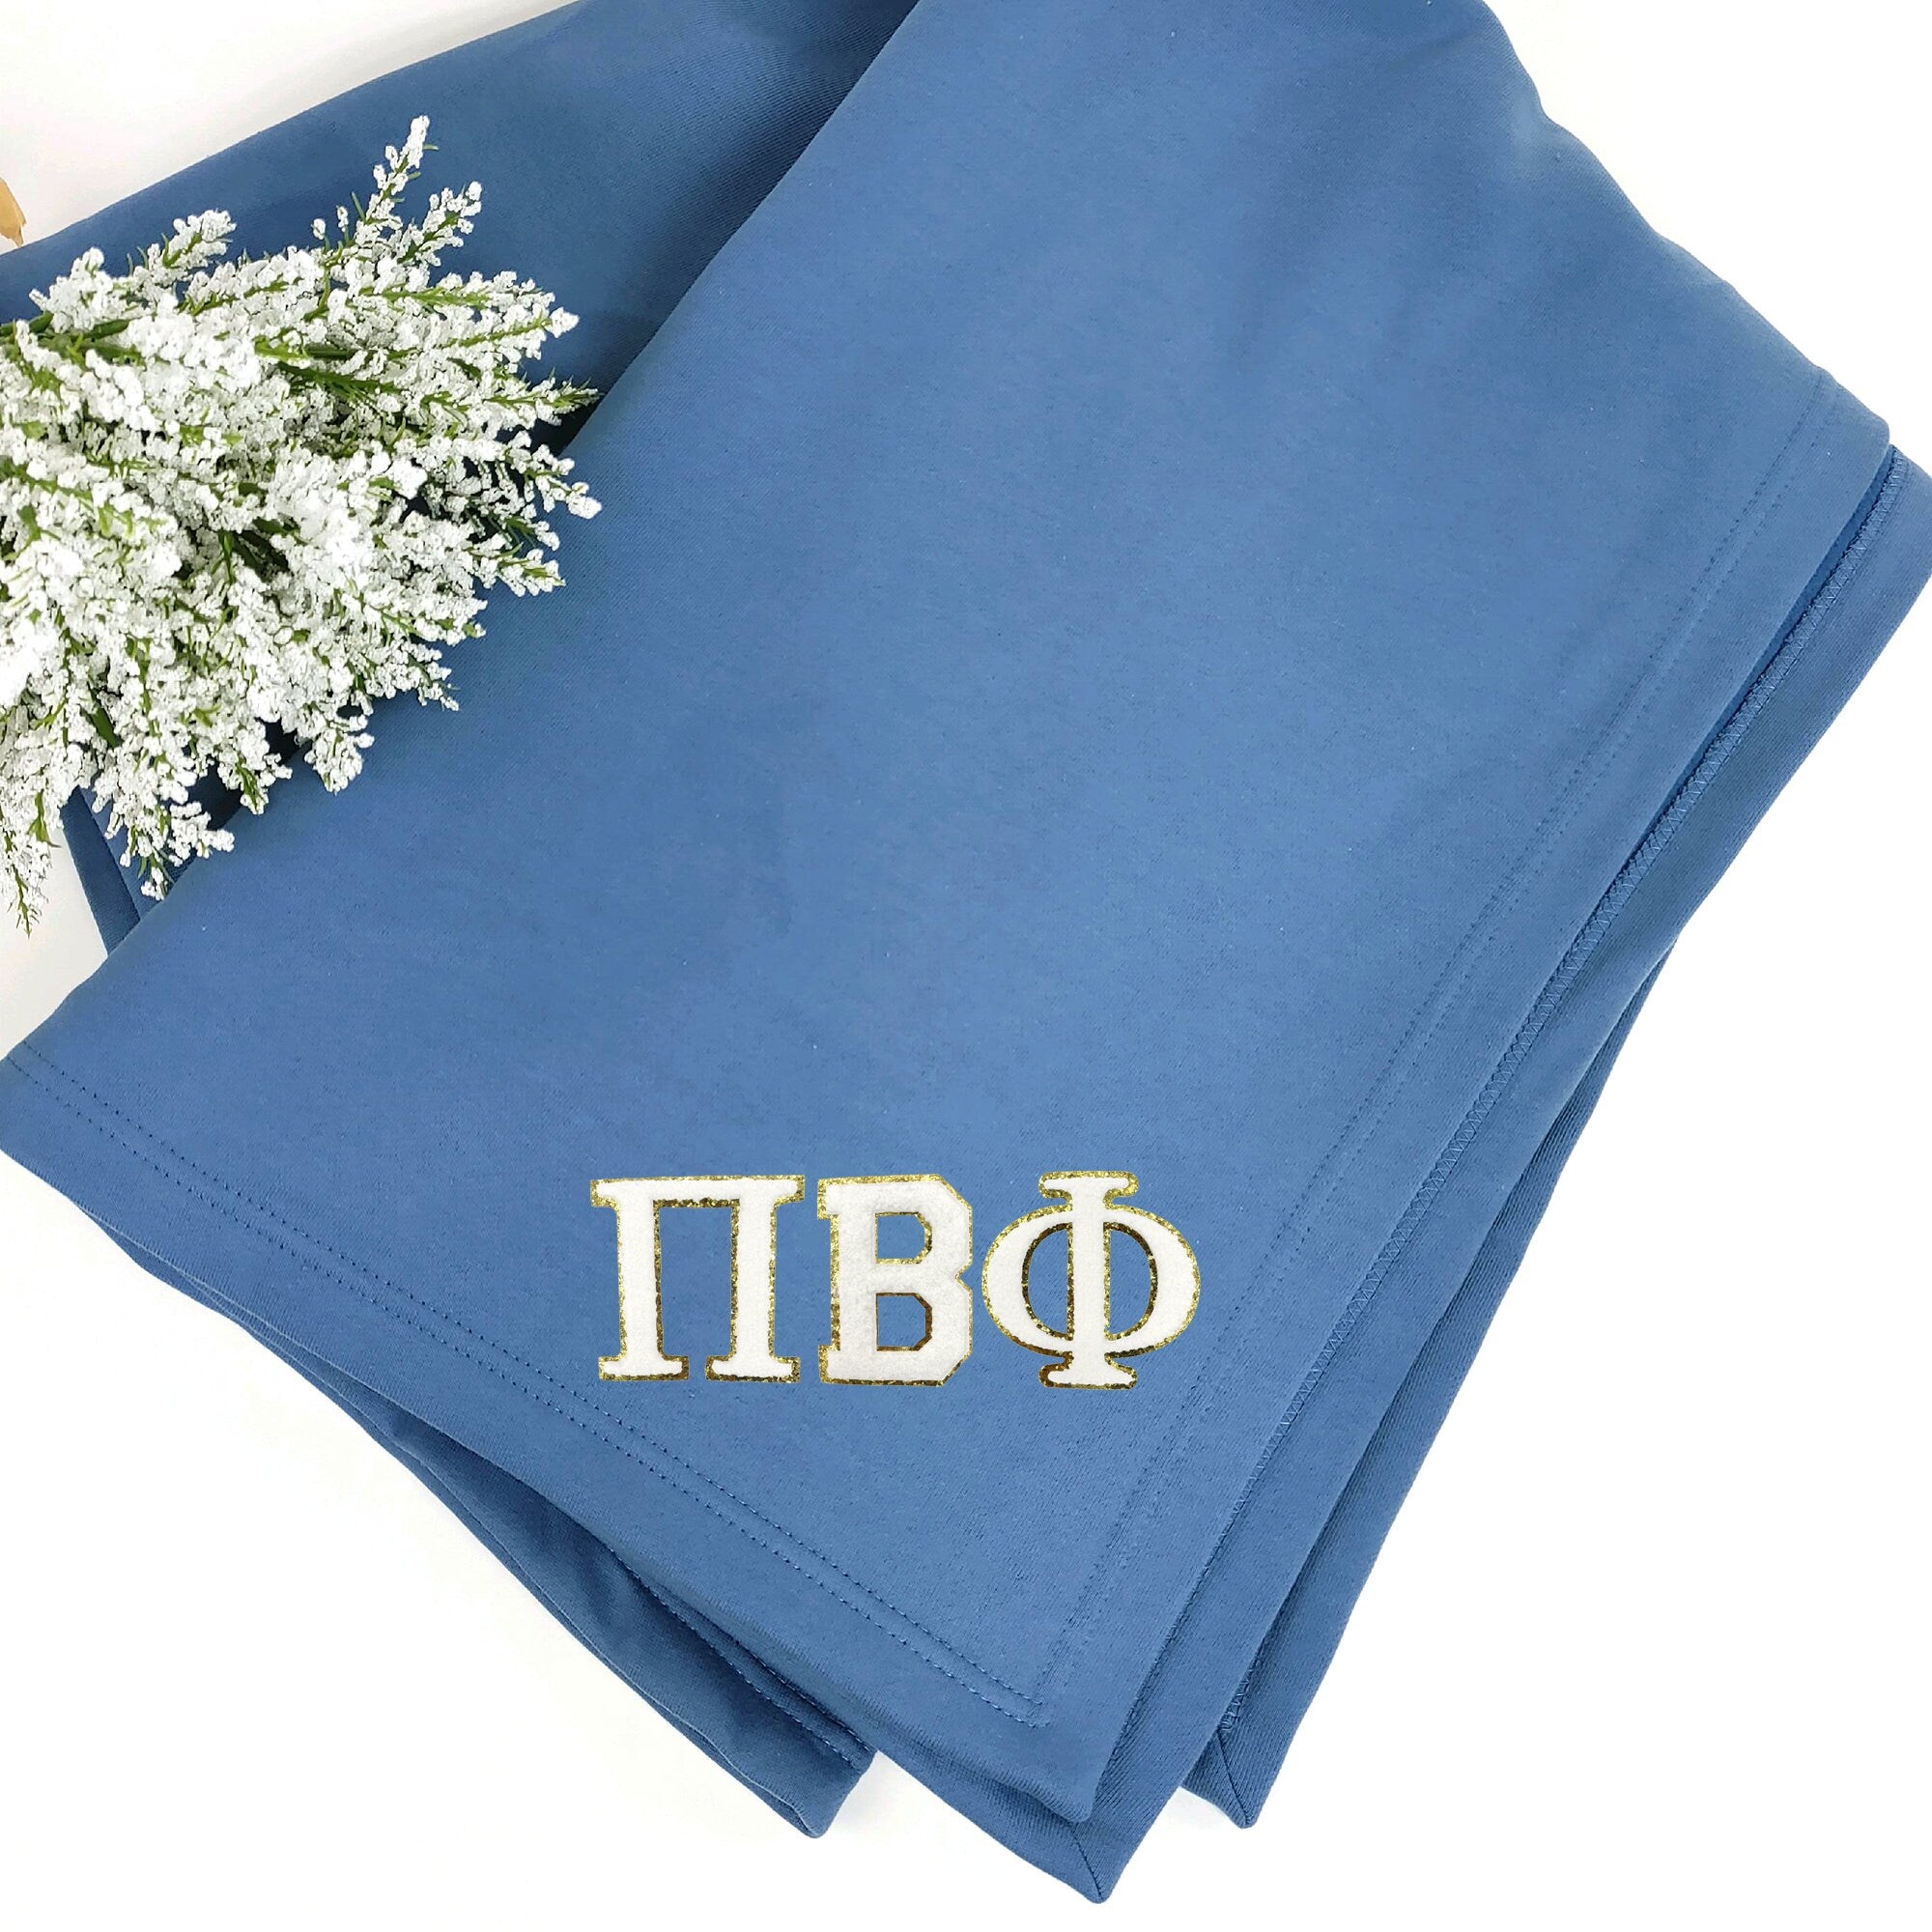 Pi Beta Phi Sweatshirt Blanket with Chenille Patch, Sorority Chenille Patch, Warm and Soft